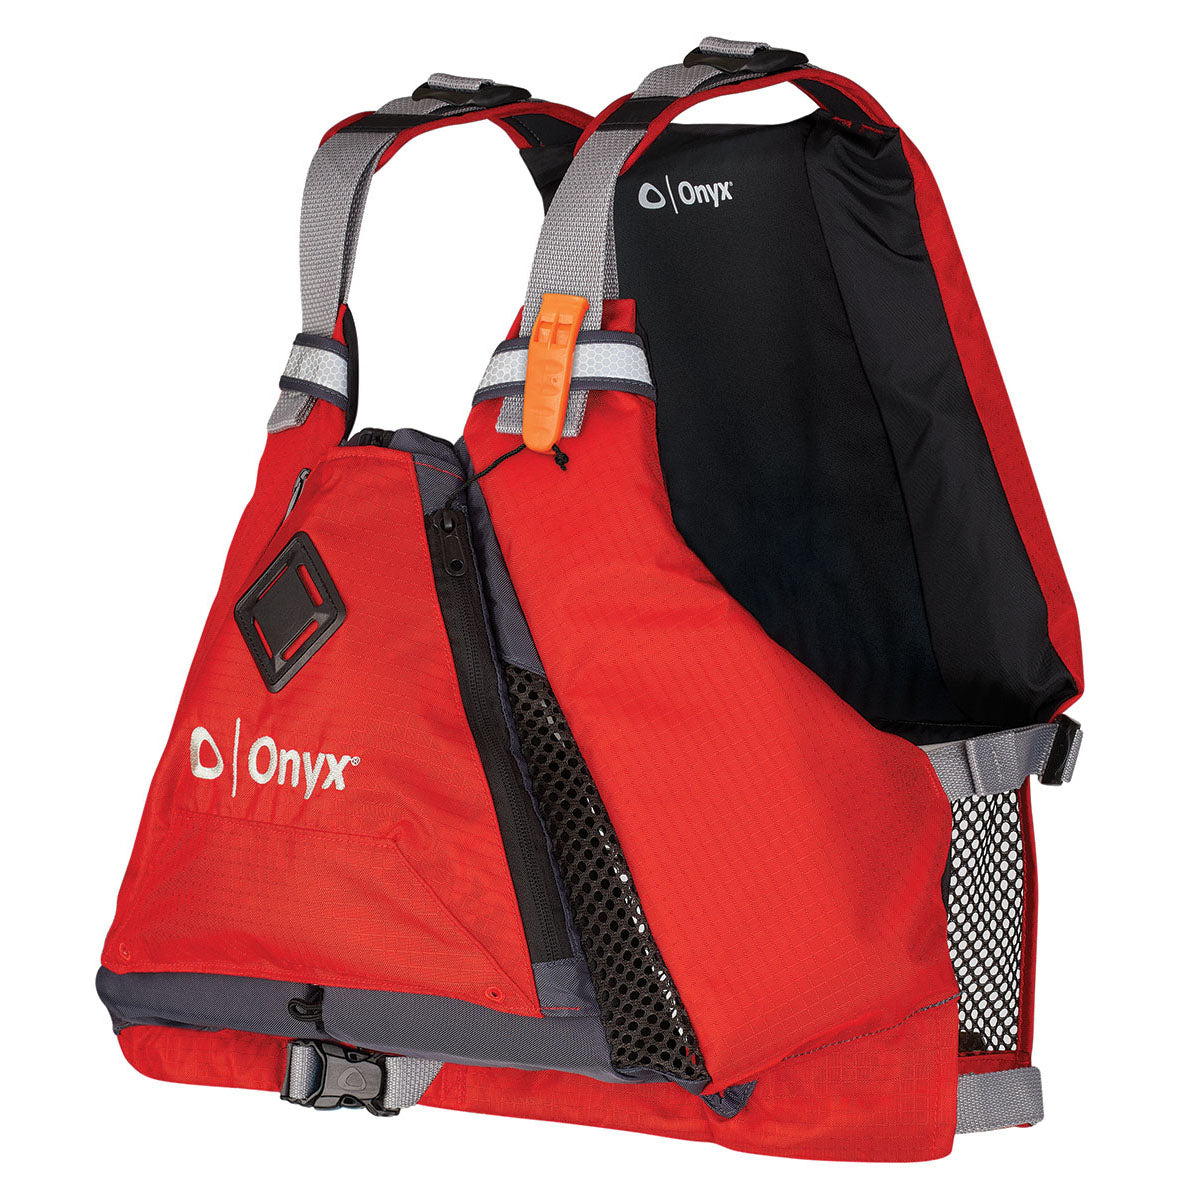 Discover Safety |Onyx Paddling Gear – Onyx Outdoor